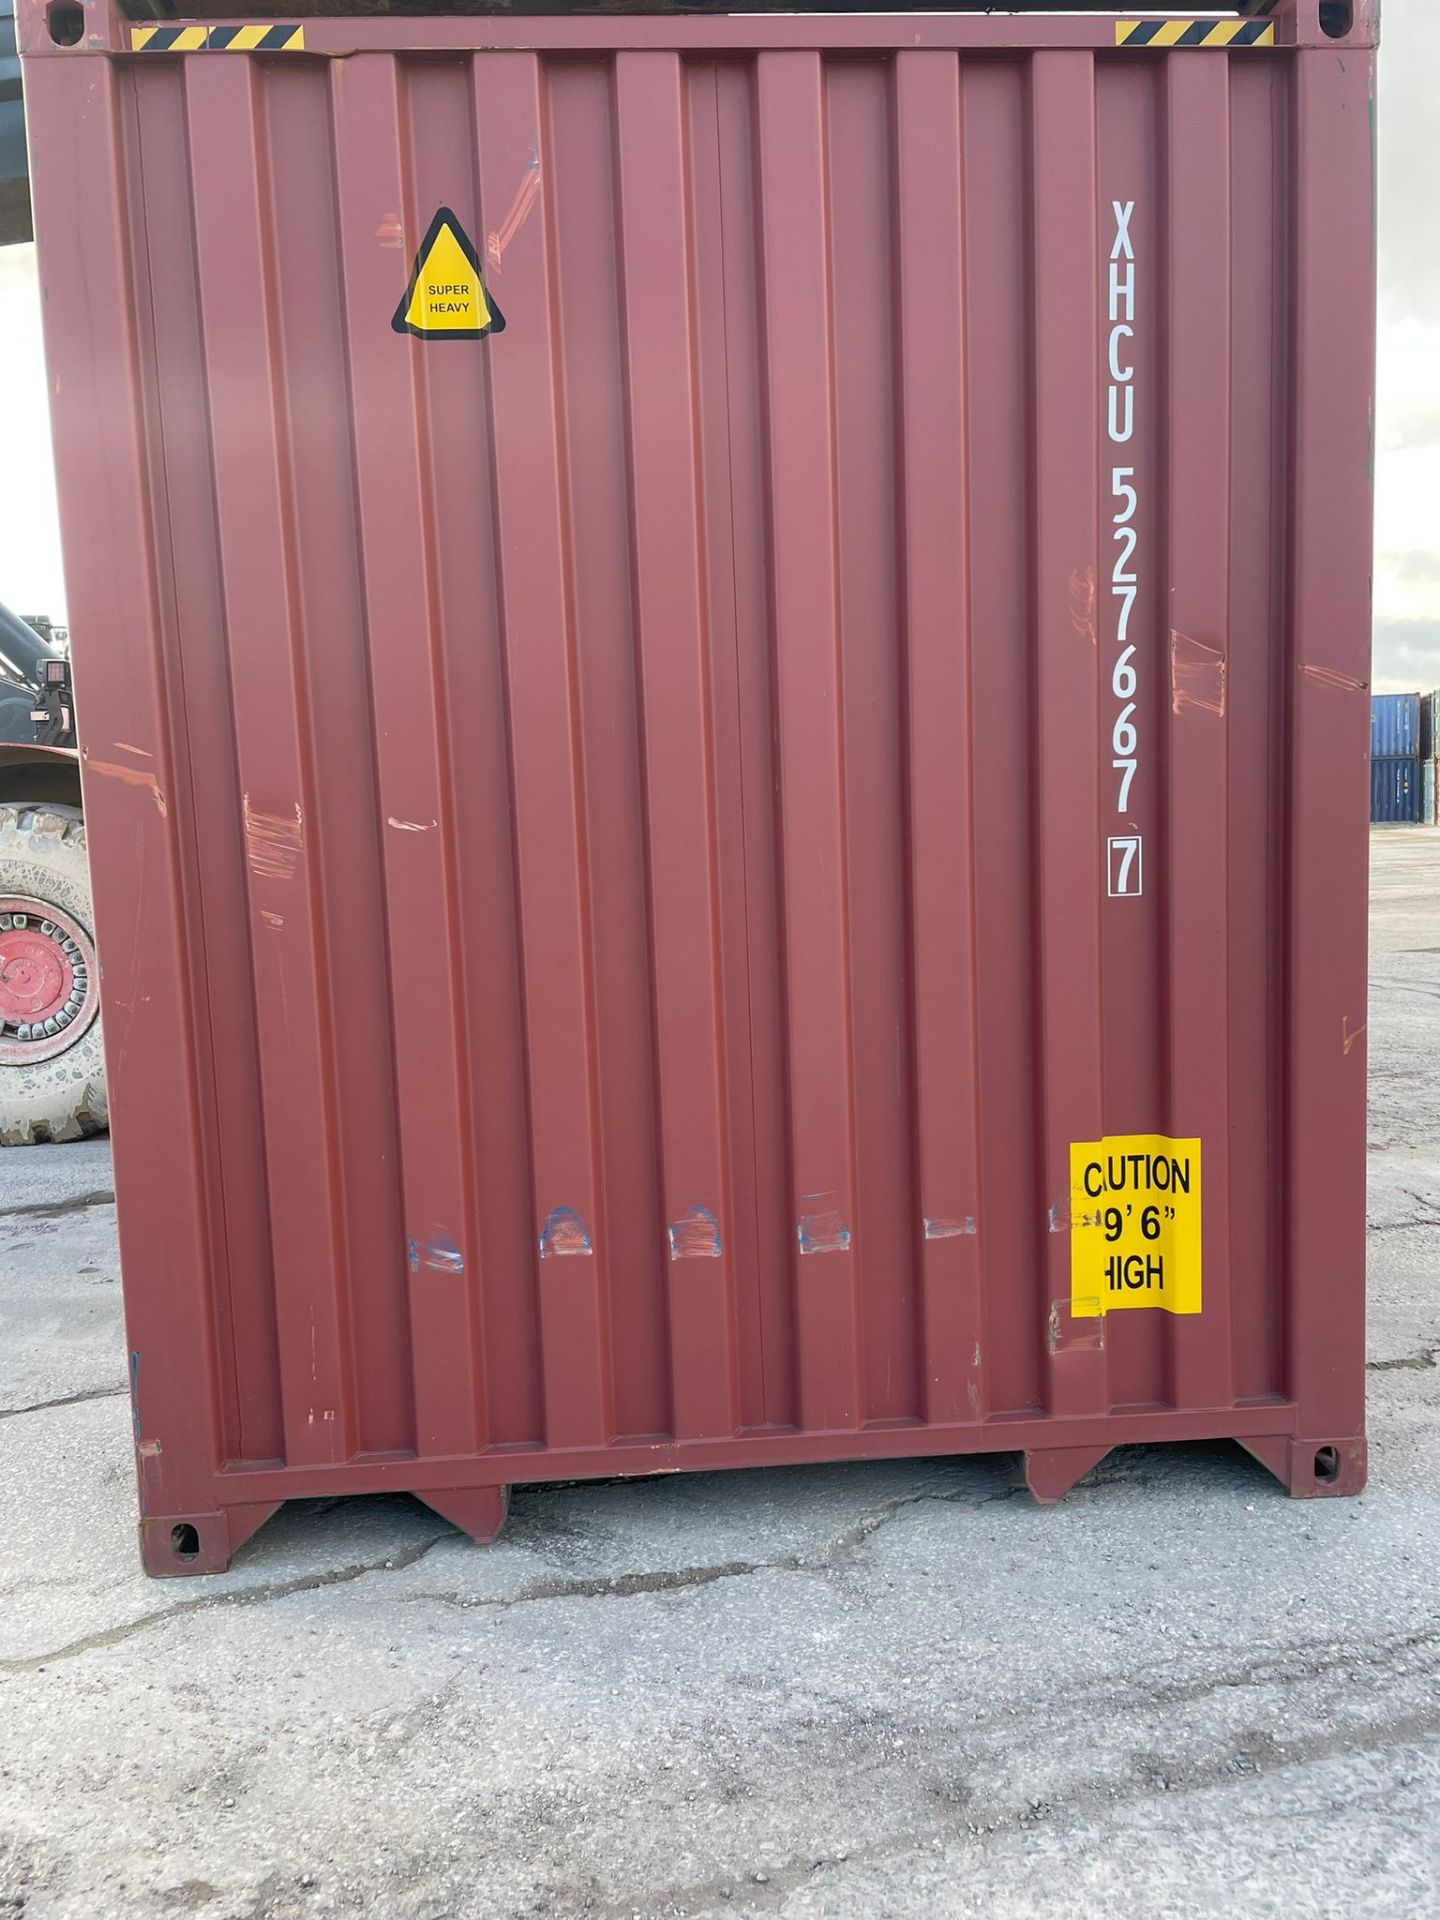 40ft HC Shipping Container - ref XHCU5276677 - Image 6 of 6